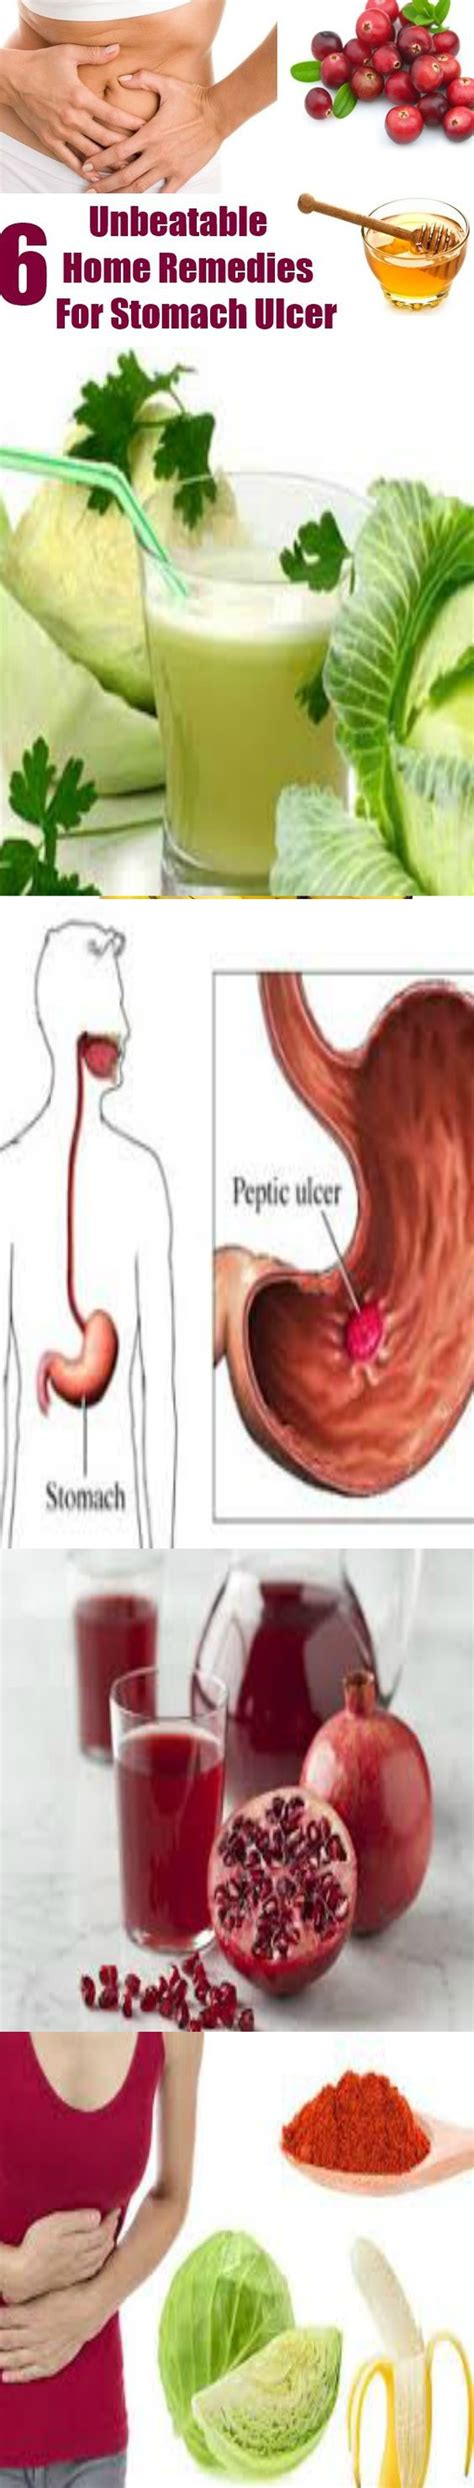 6 Unbeatable Home Remedies For Stomach Ulcer Stomach Ulcers Home